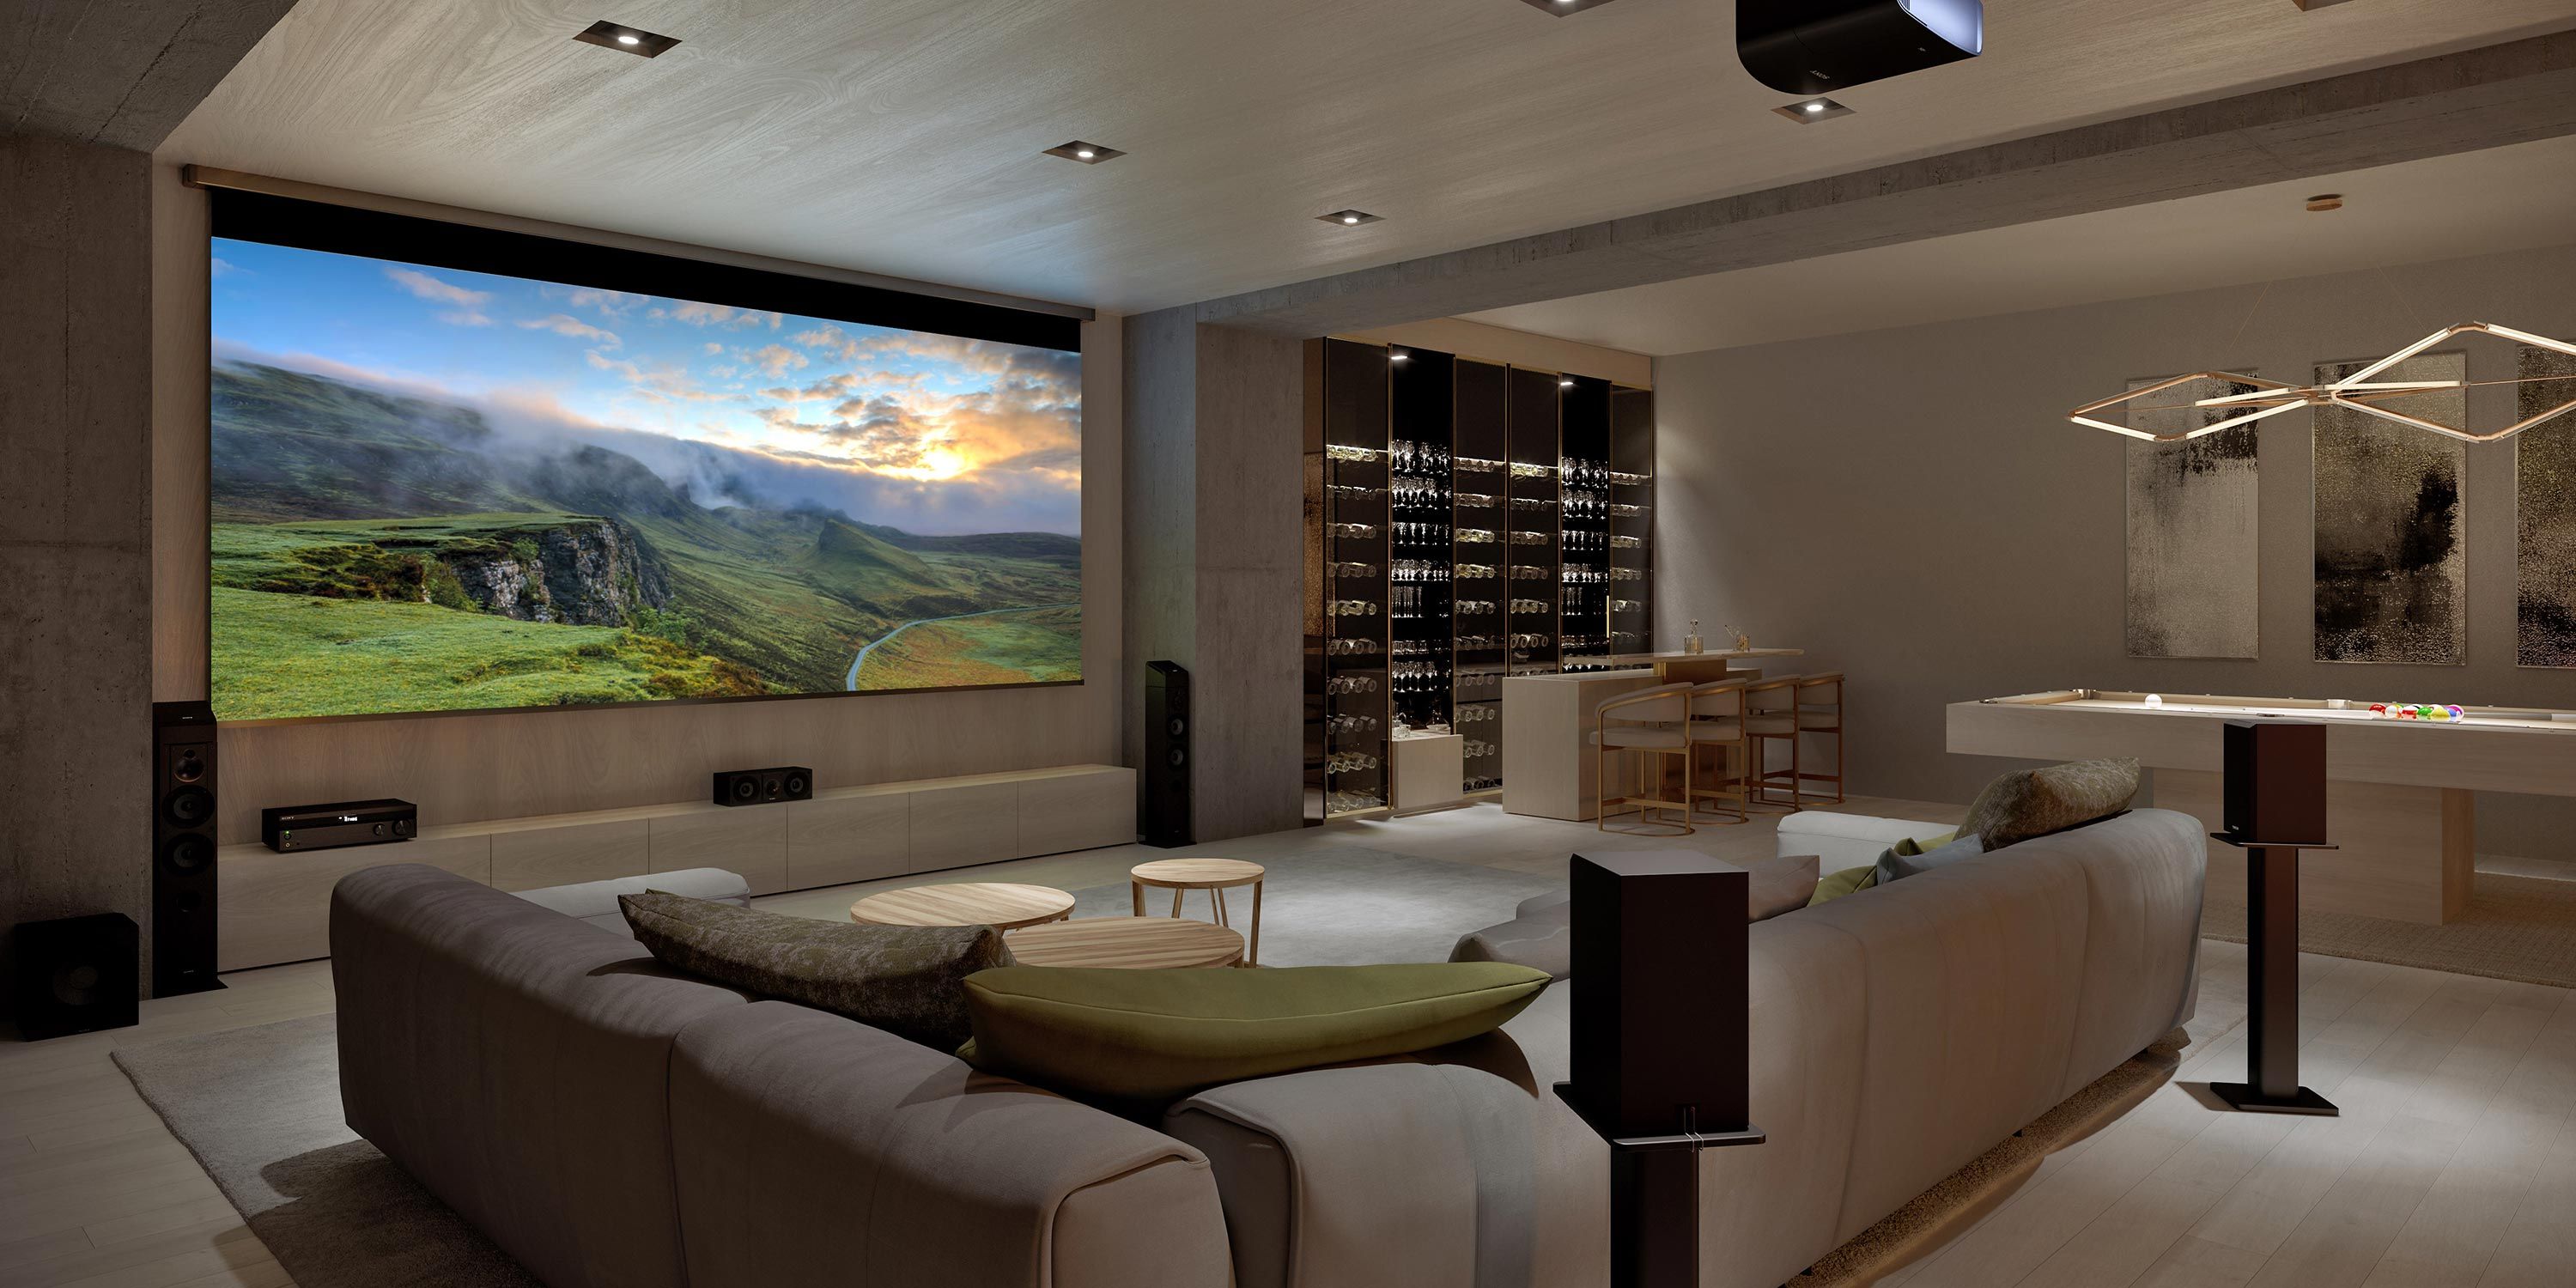 Sony technology in a home game room